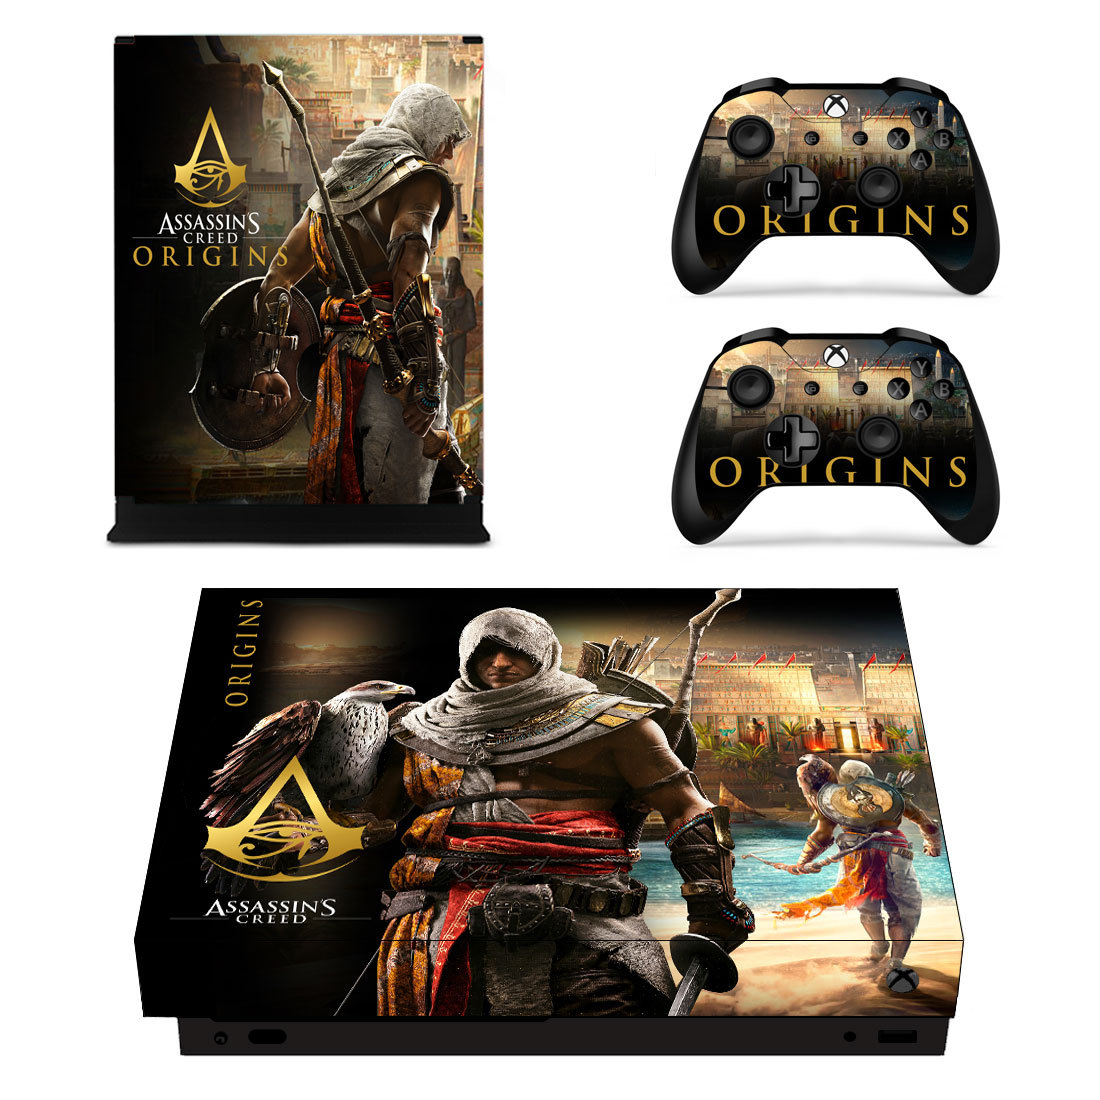 Assassin's Creed Origins Xbox One X Console Skin Vinyl Cover Stickers Decals Set - $14.00